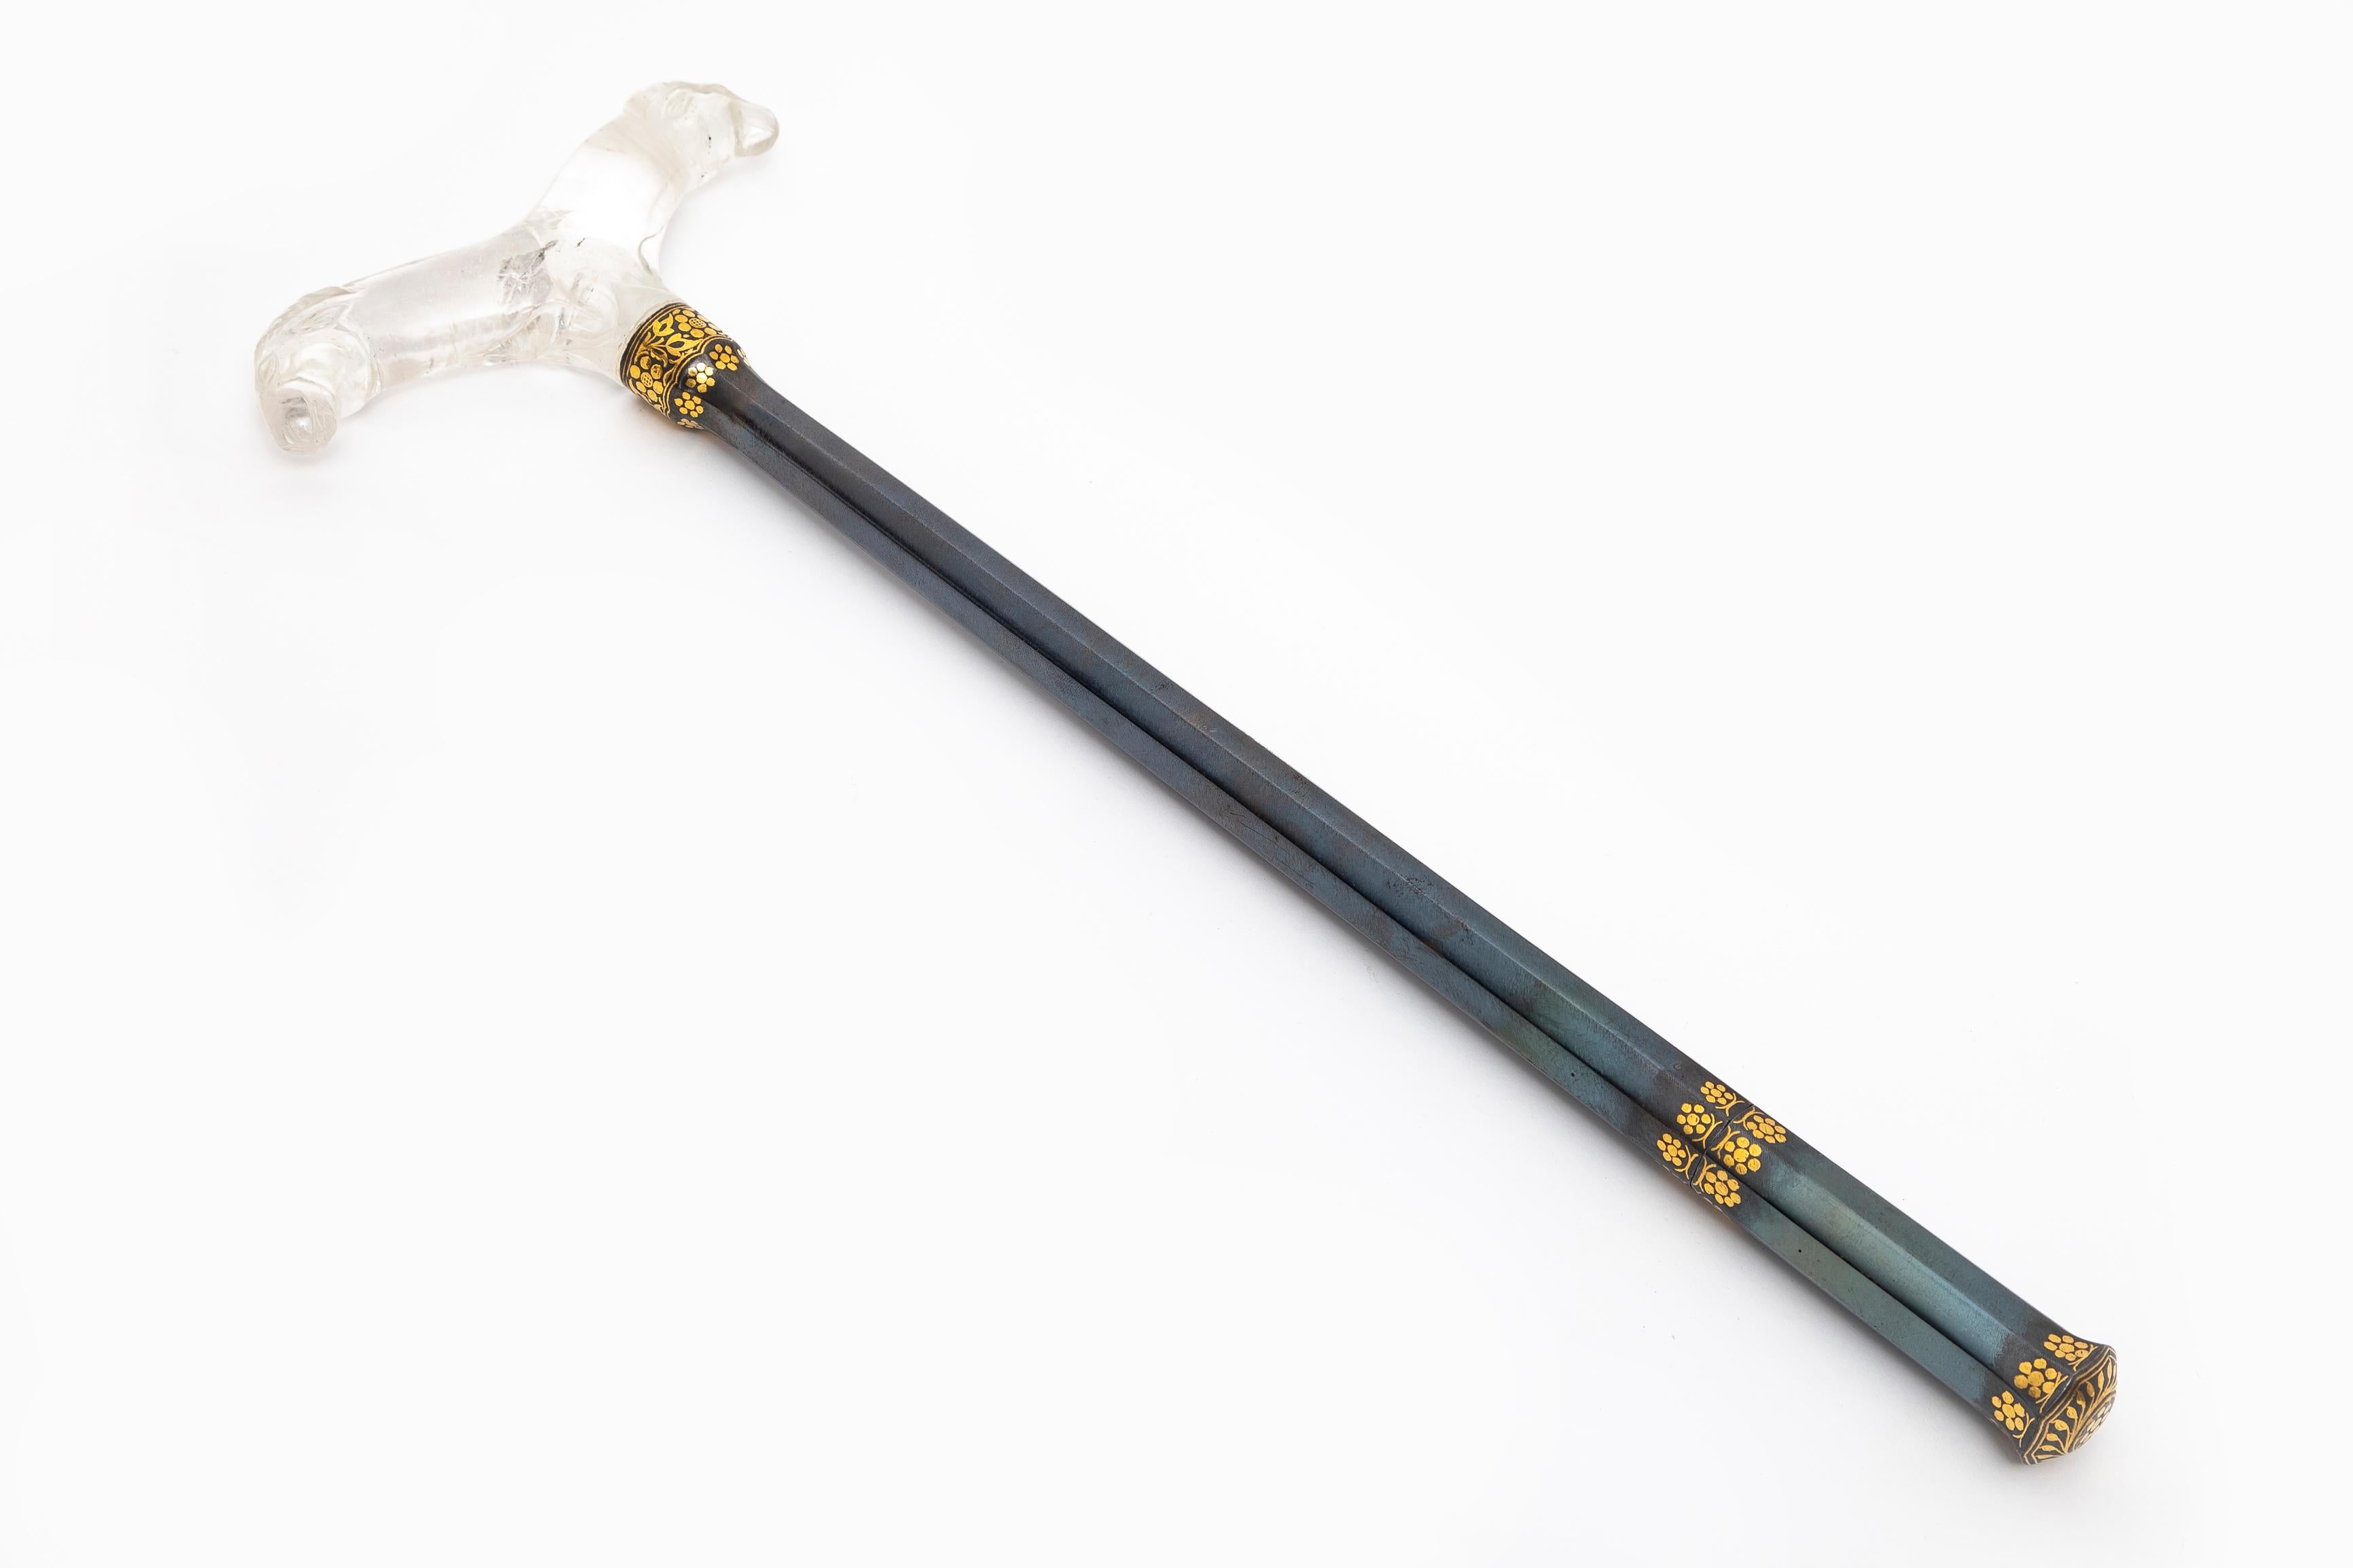 An Incredible and Quite Rare 18th/19th Century Islamic/Mogul Blued Steel and Gold Inlay Rock Crystal Double Rams Head Handle Cane/Swagger Stick. This elegant cane features blued steel adorned with a delicate floral motif and gold inlay, complemented